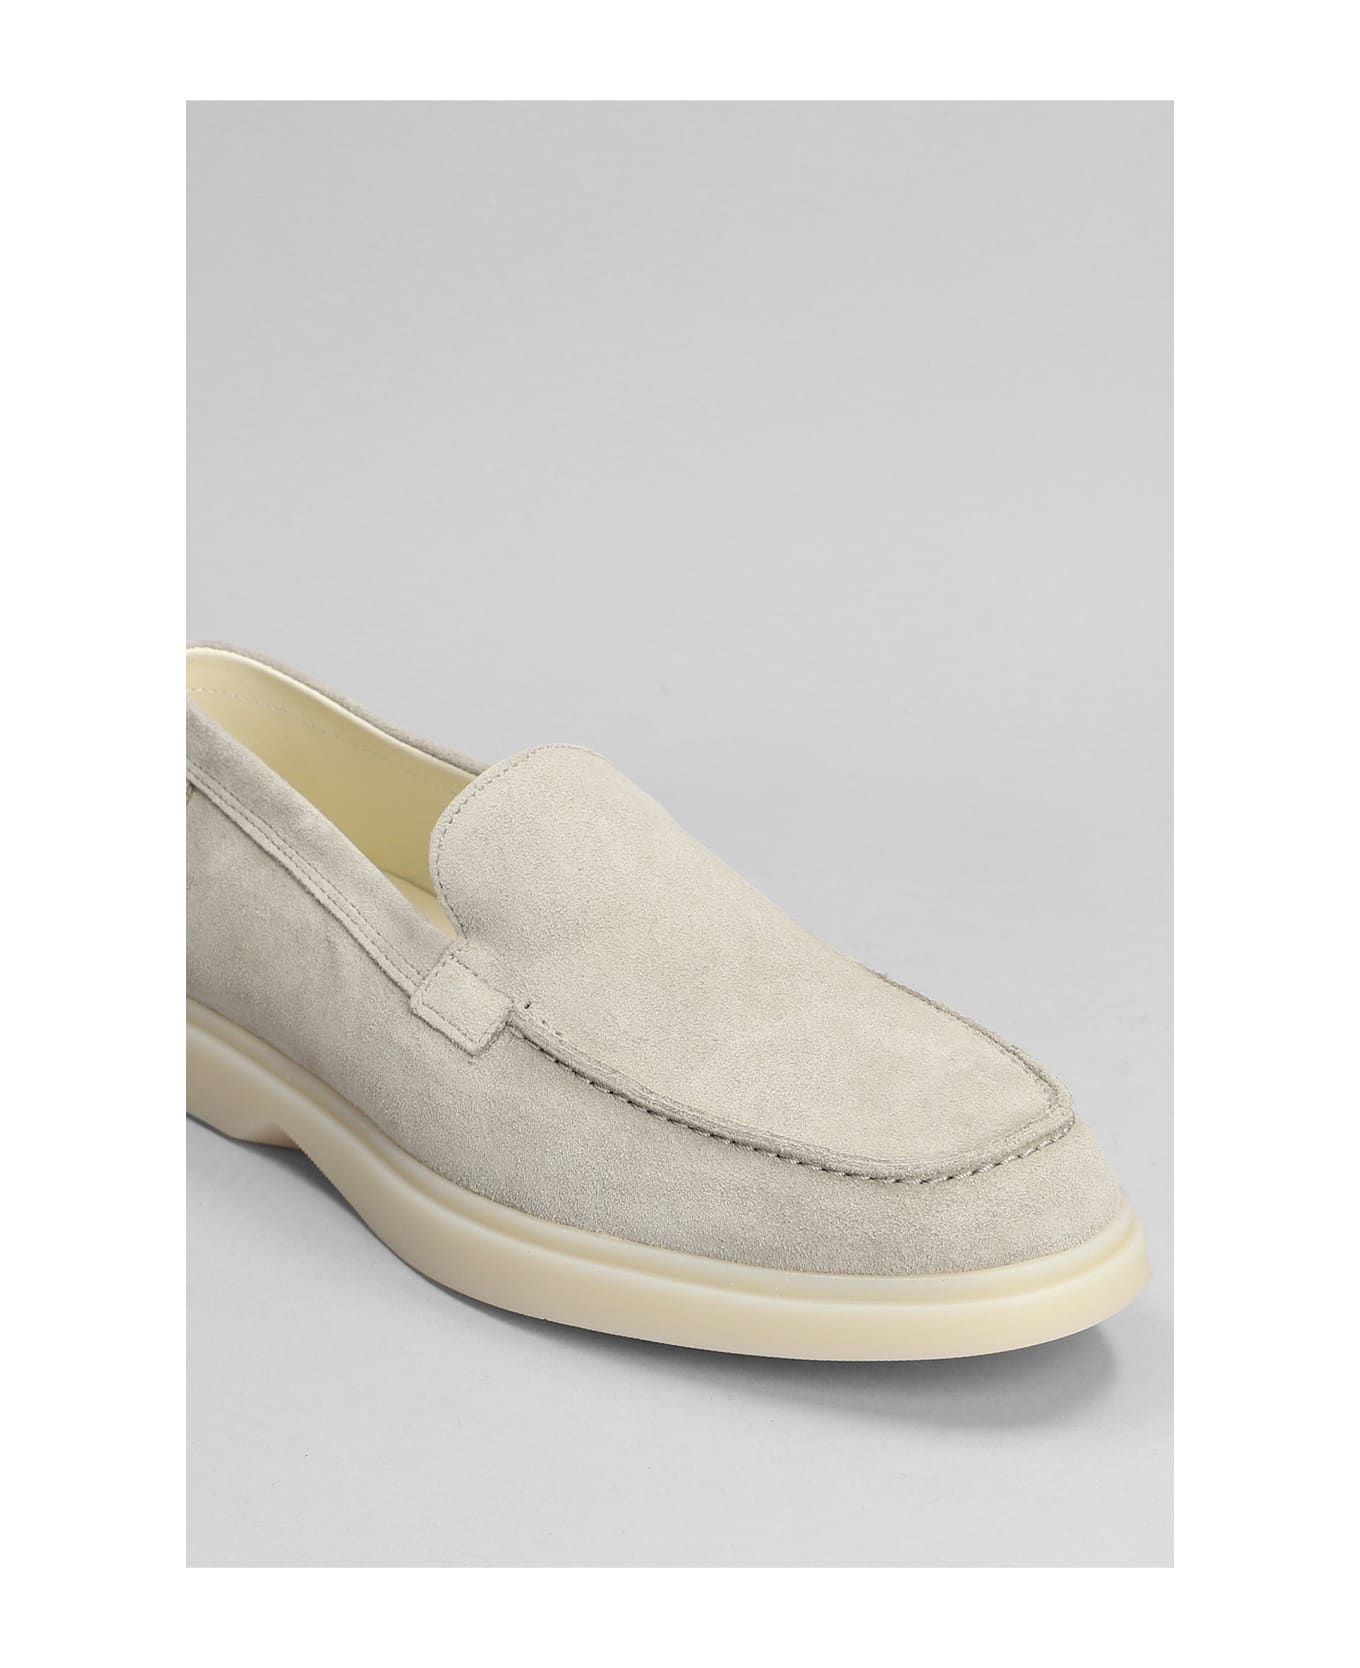 Mason Garments Amalfi Loafers In Taupe Suede - taupe